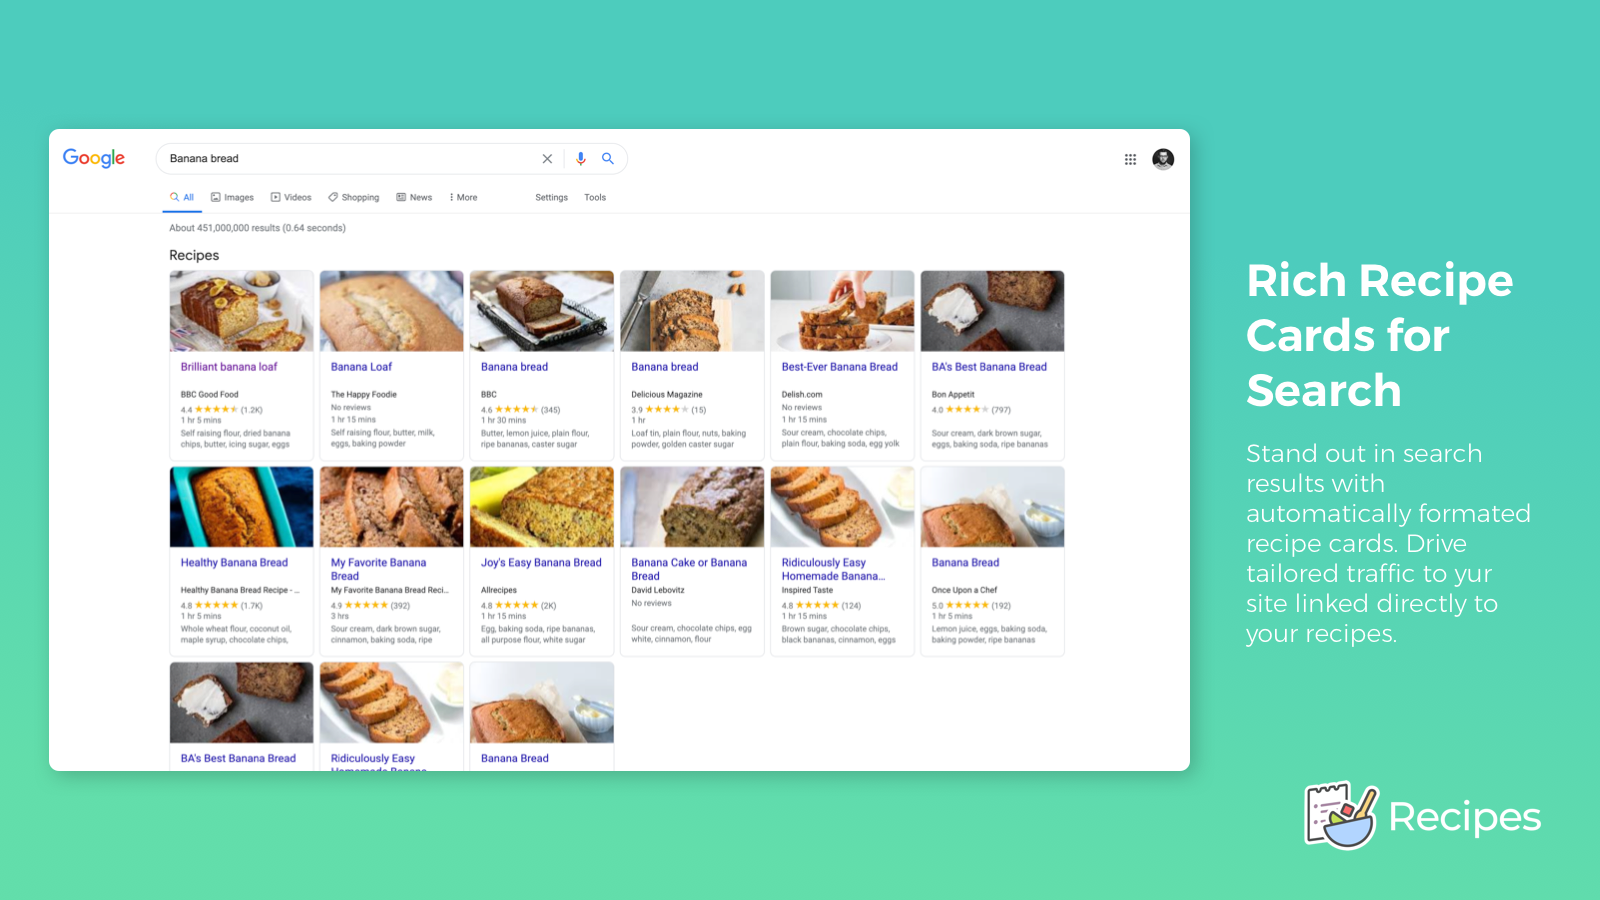 Rich recipe cards show on search results automatically